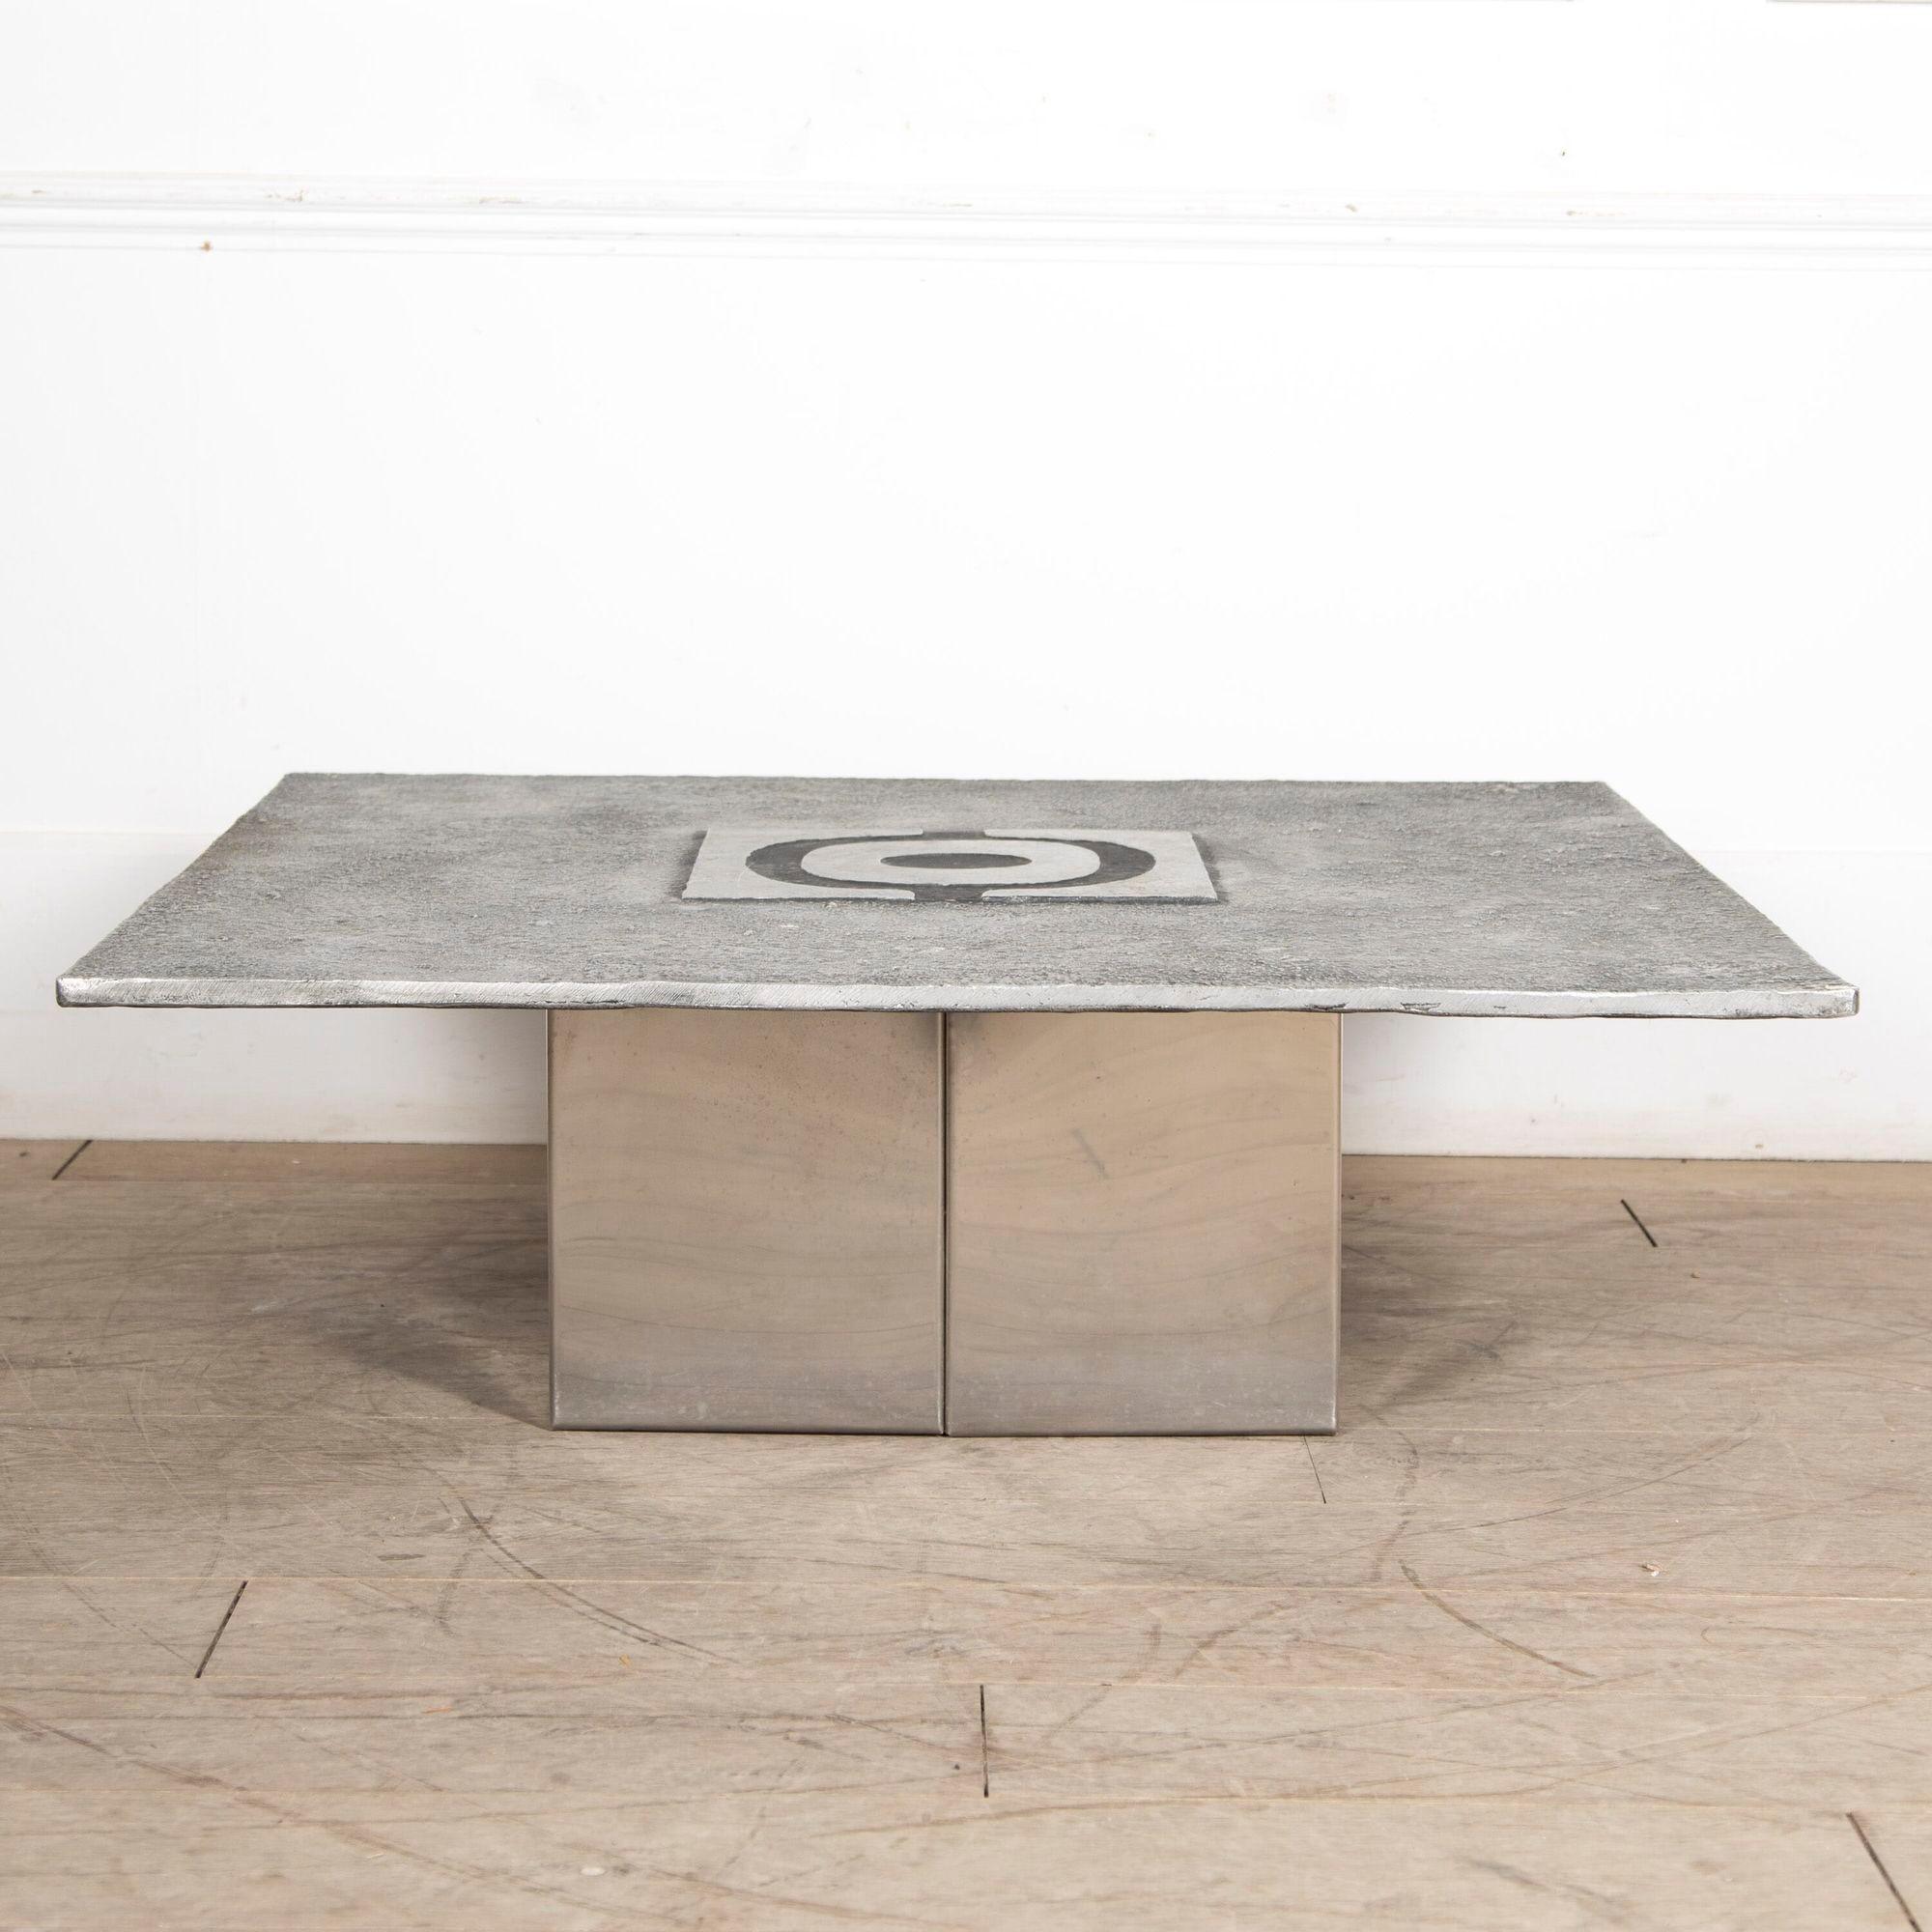 Gorgeous Belgian aluminum cast coffee table dating to the 1970s.
This fabulous table was designed by Belgian designer, Willy Ceysens.
A beautiful piece for any living space!